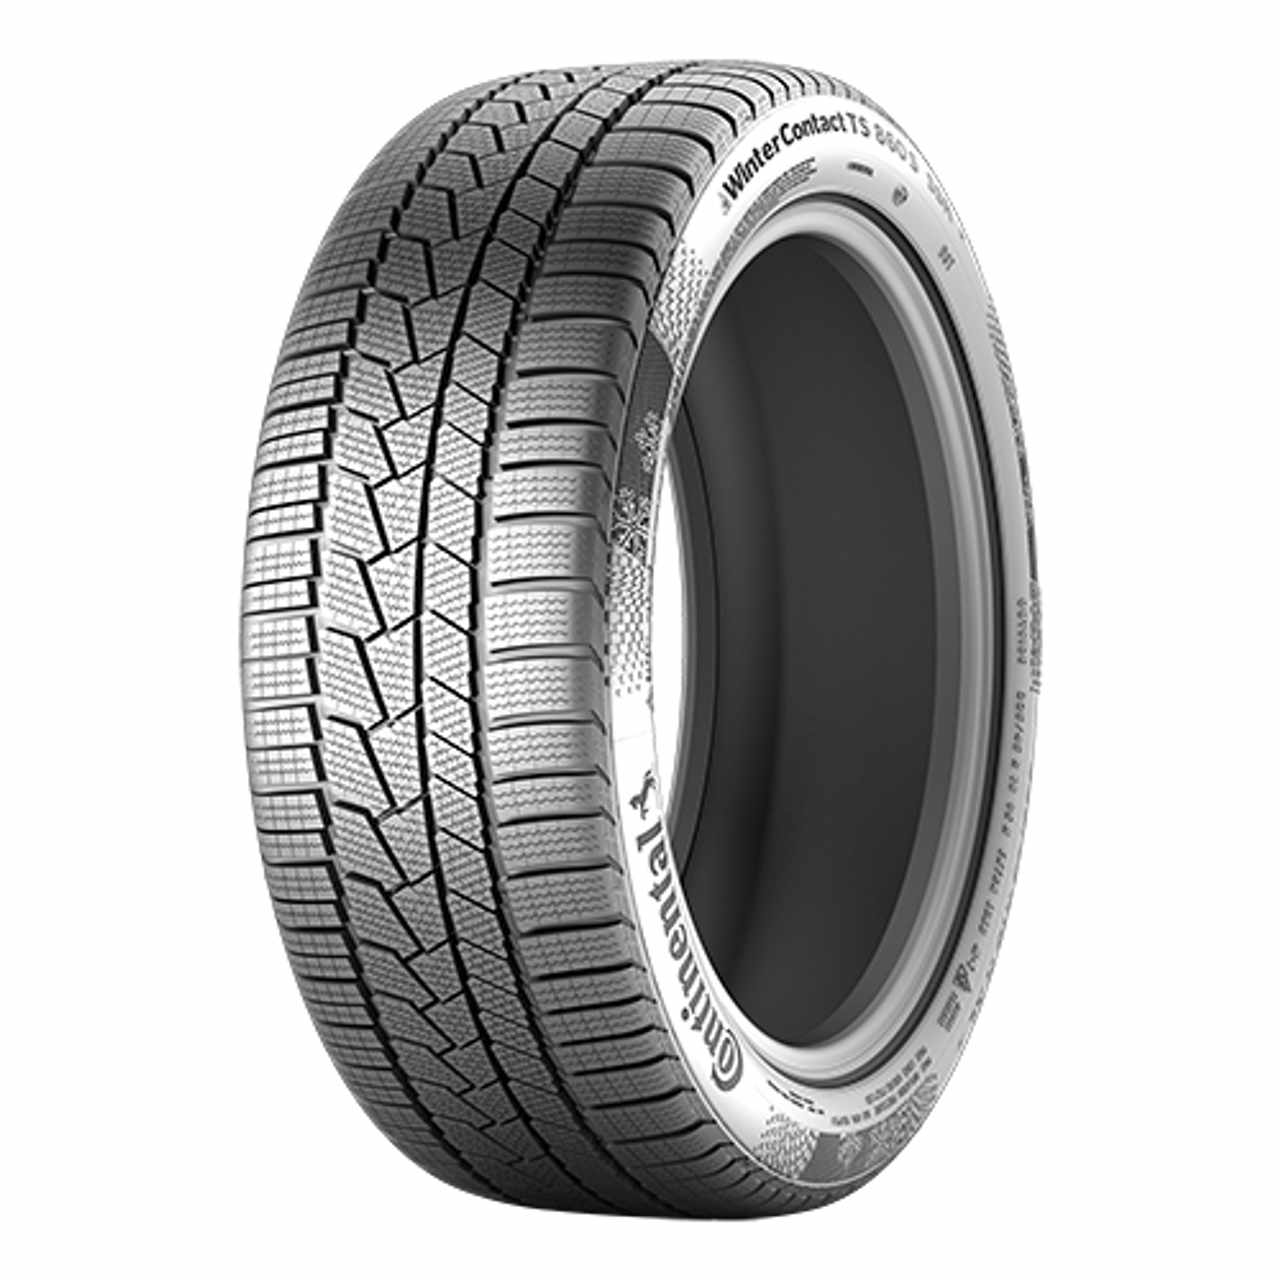 CONTINENTAL WINTERCONTACT TS 860 S (MO1) (EVc) 255/45R20 105V FR BSW